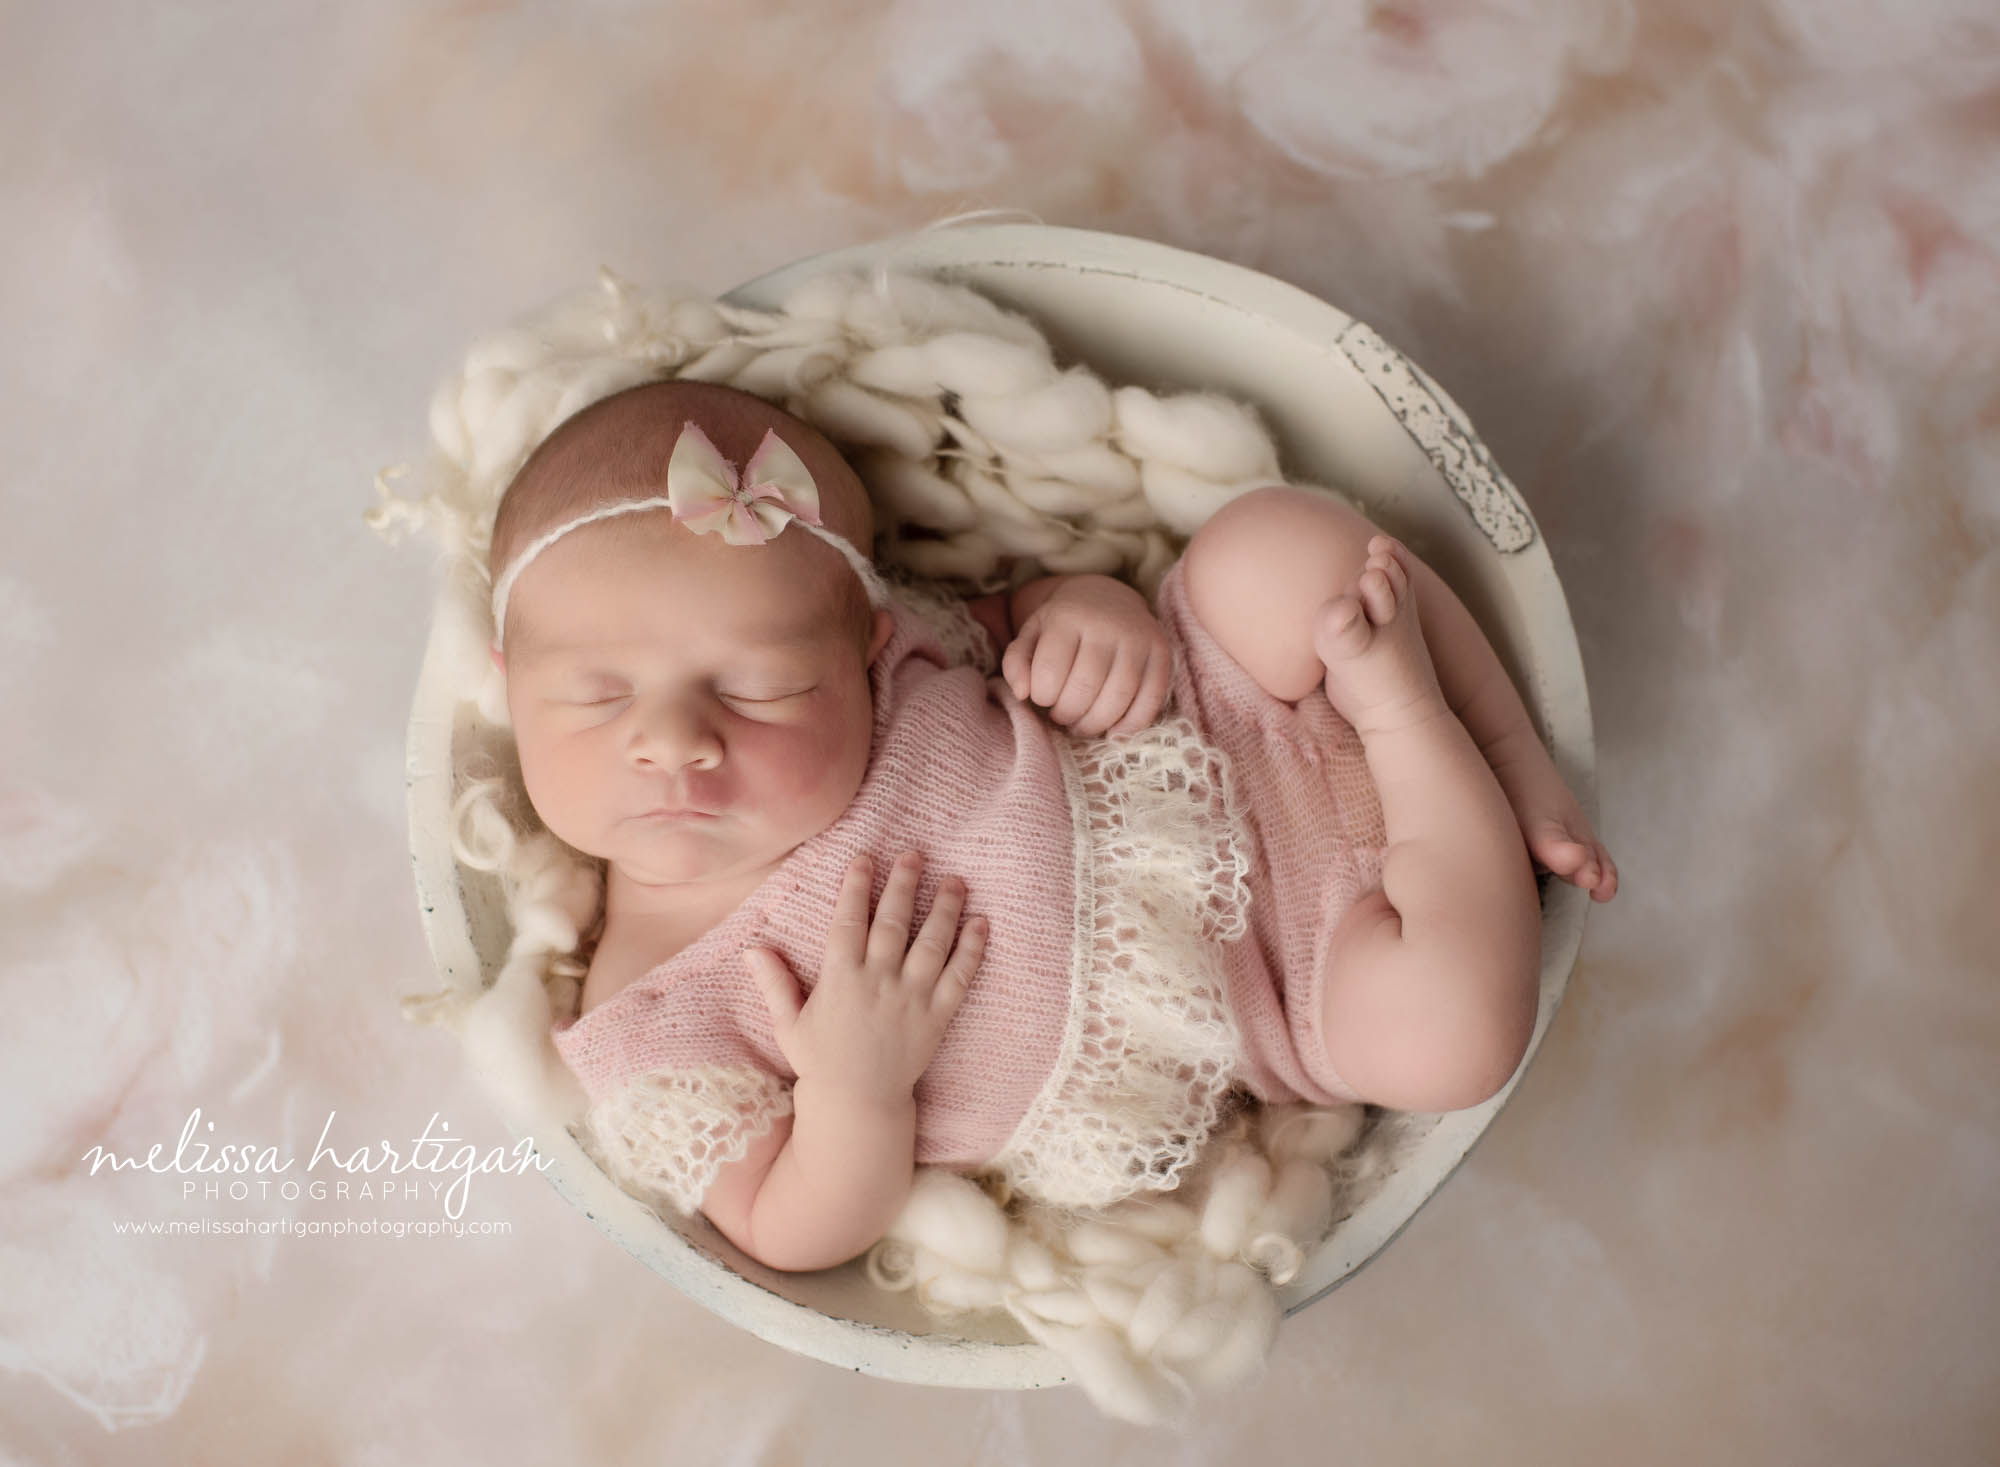 newborn baby girl ppsed in cream bowl wearing pink and cream lace outfit